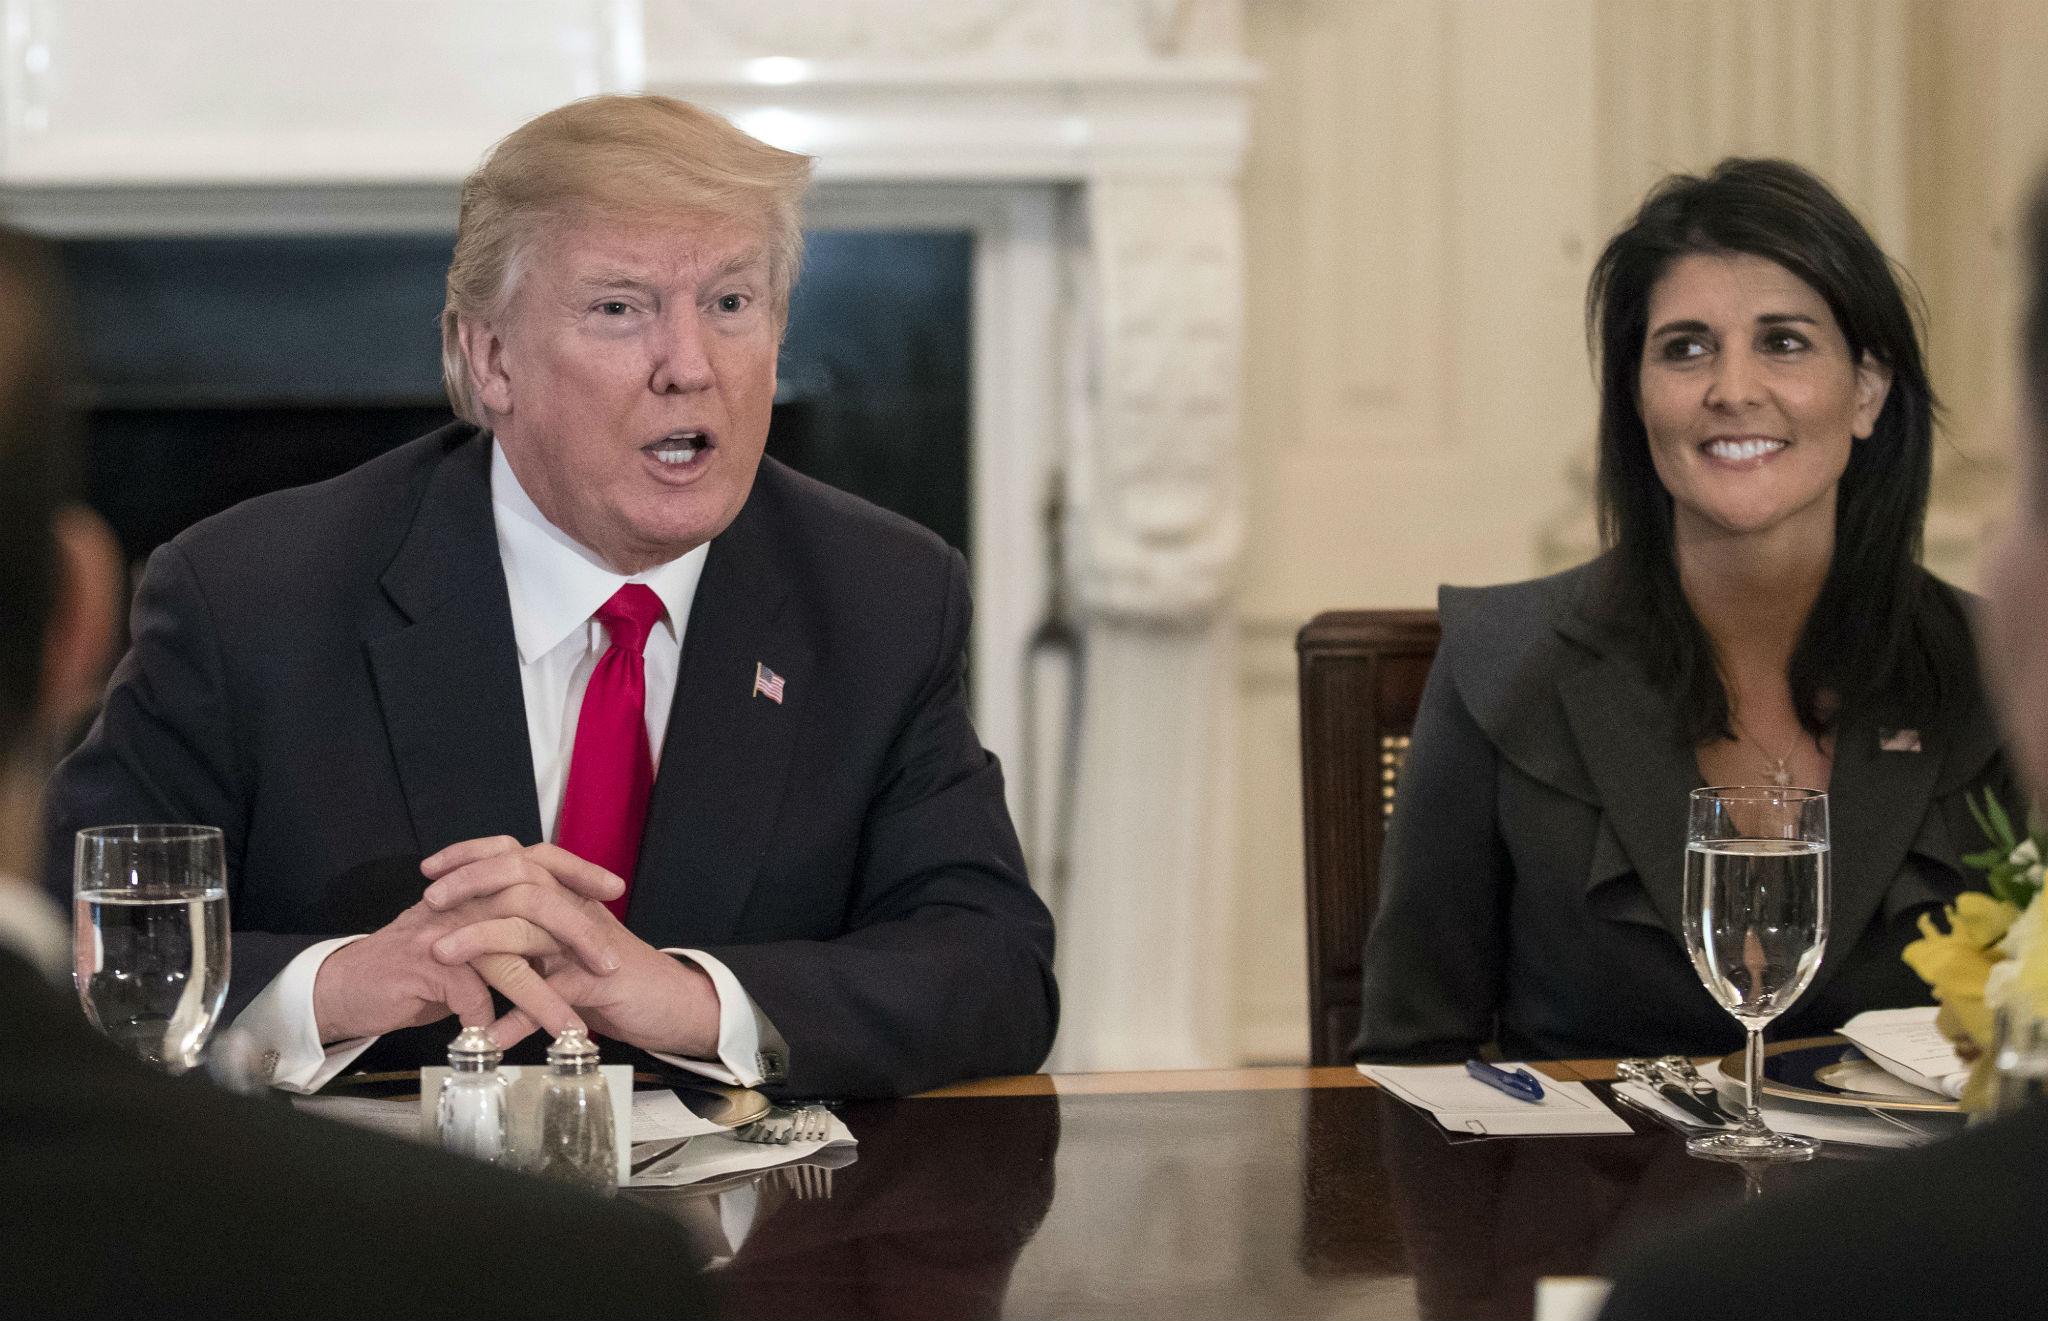 During a meeting with members of the UN Security Council, President Donald Trump said his administration would no longer engage in talks with the Taliban. He is sitting next to Nikki Haley, the US's ambassador to the UN